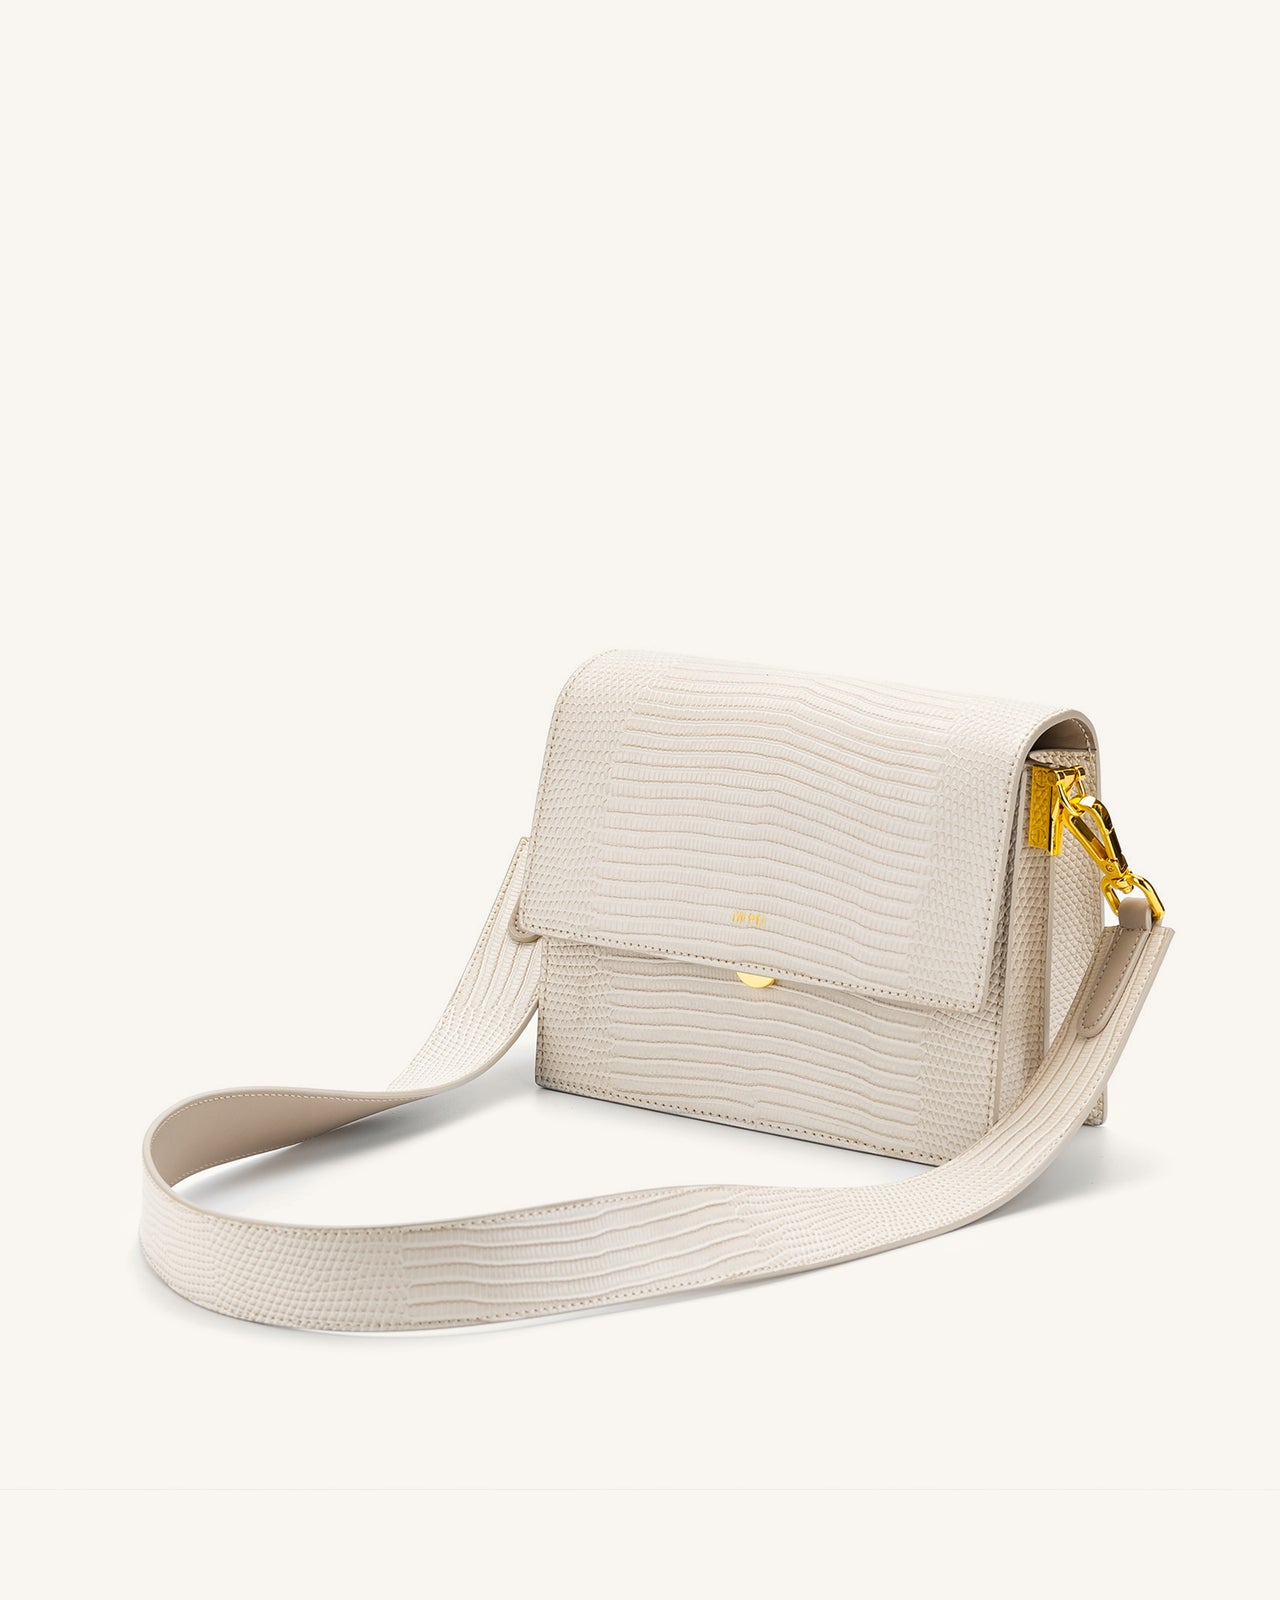 JW Pei Tina Quilted Chain Crossbody